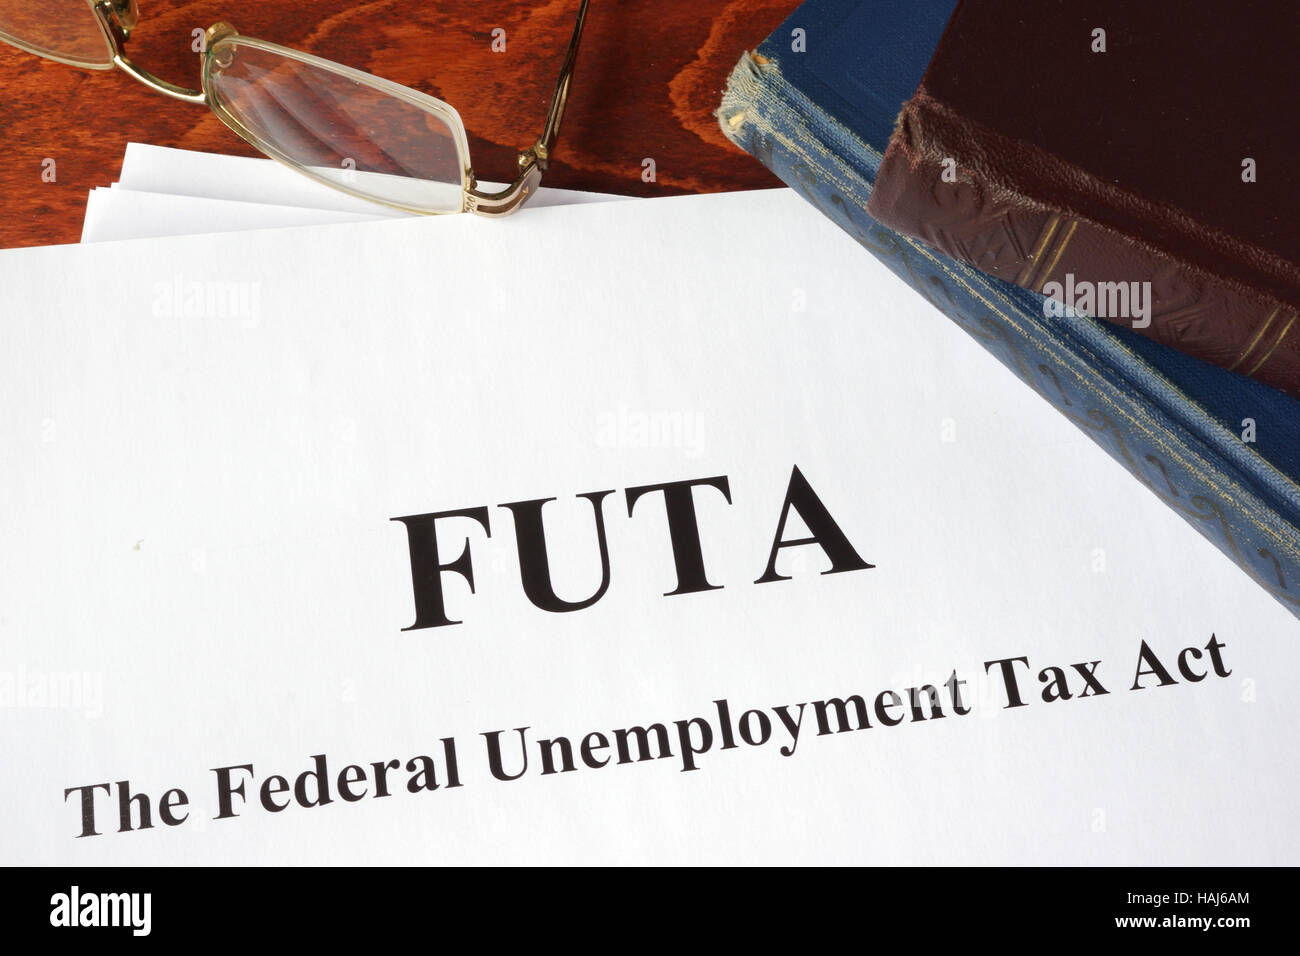 Papers with FUTA Federal Unemployment Tax Act. Stock Photo